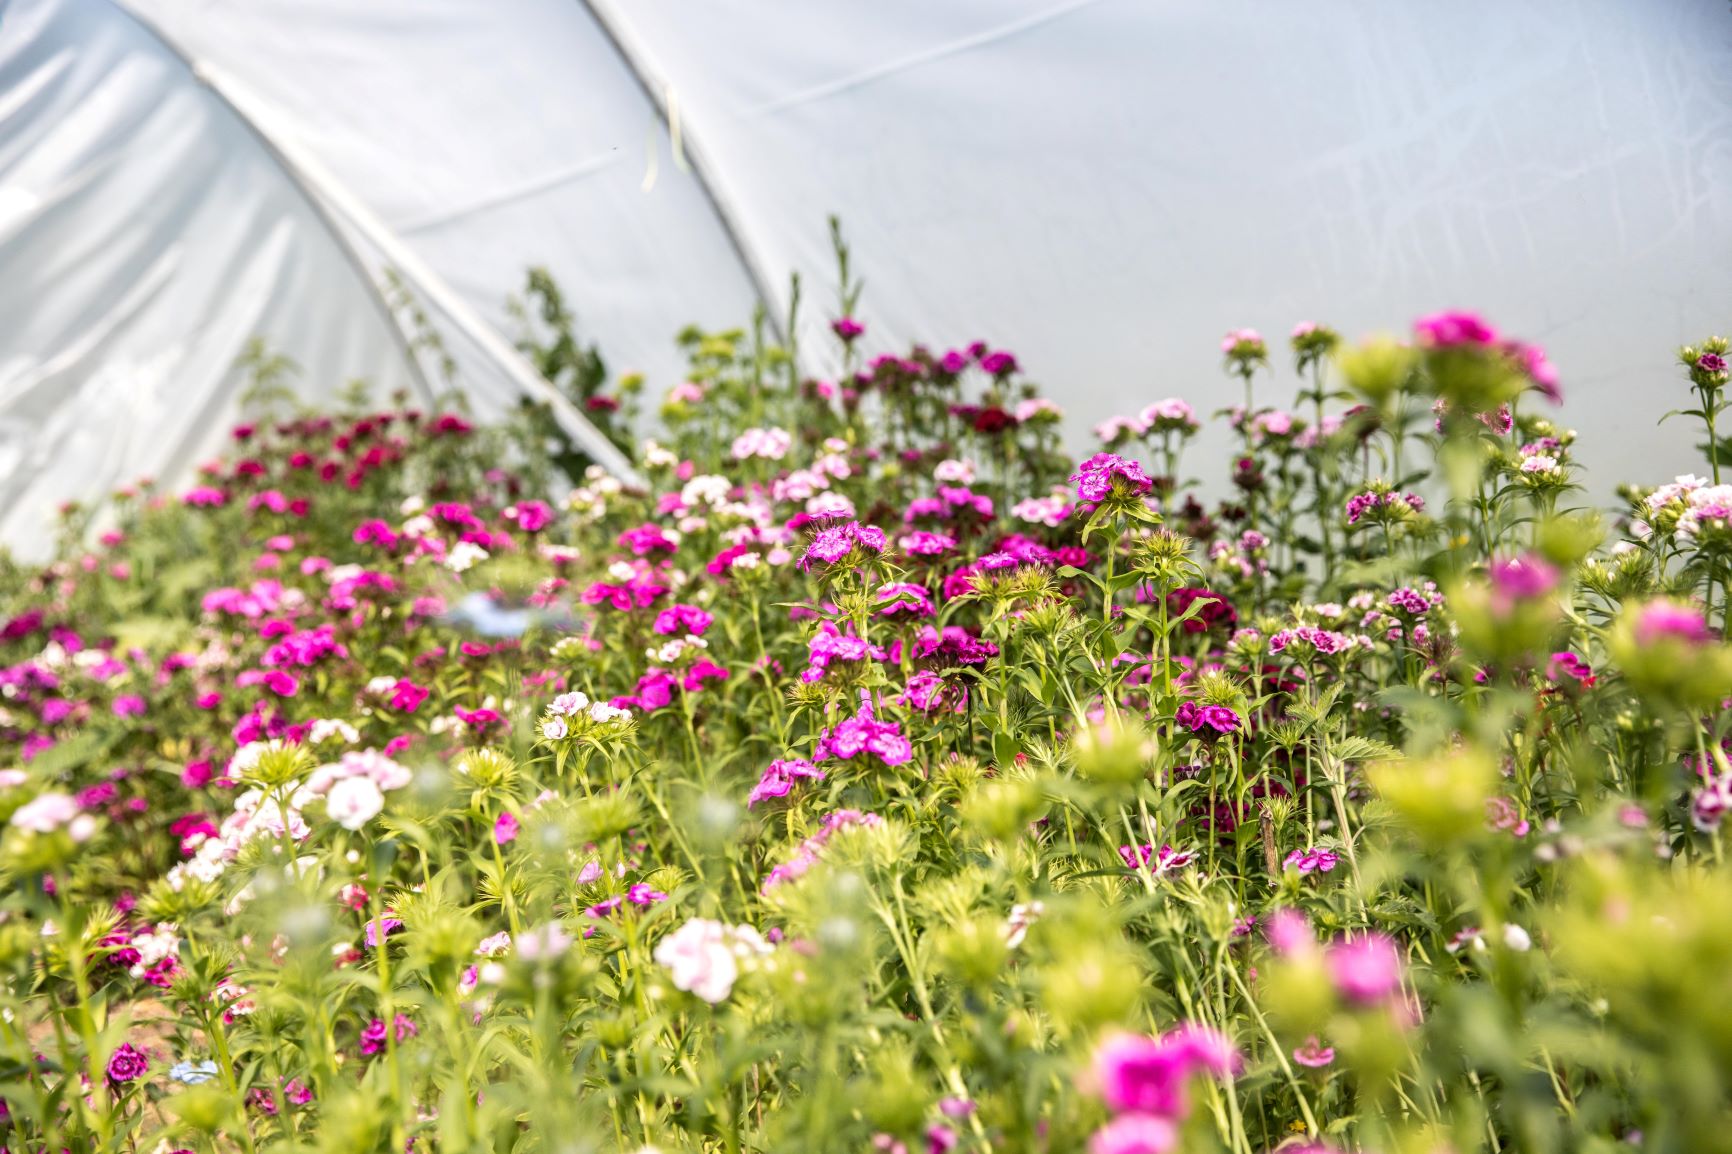 A beautiful crop of sweet williams in the polytunnel at Sweetpeas and Sunflowers